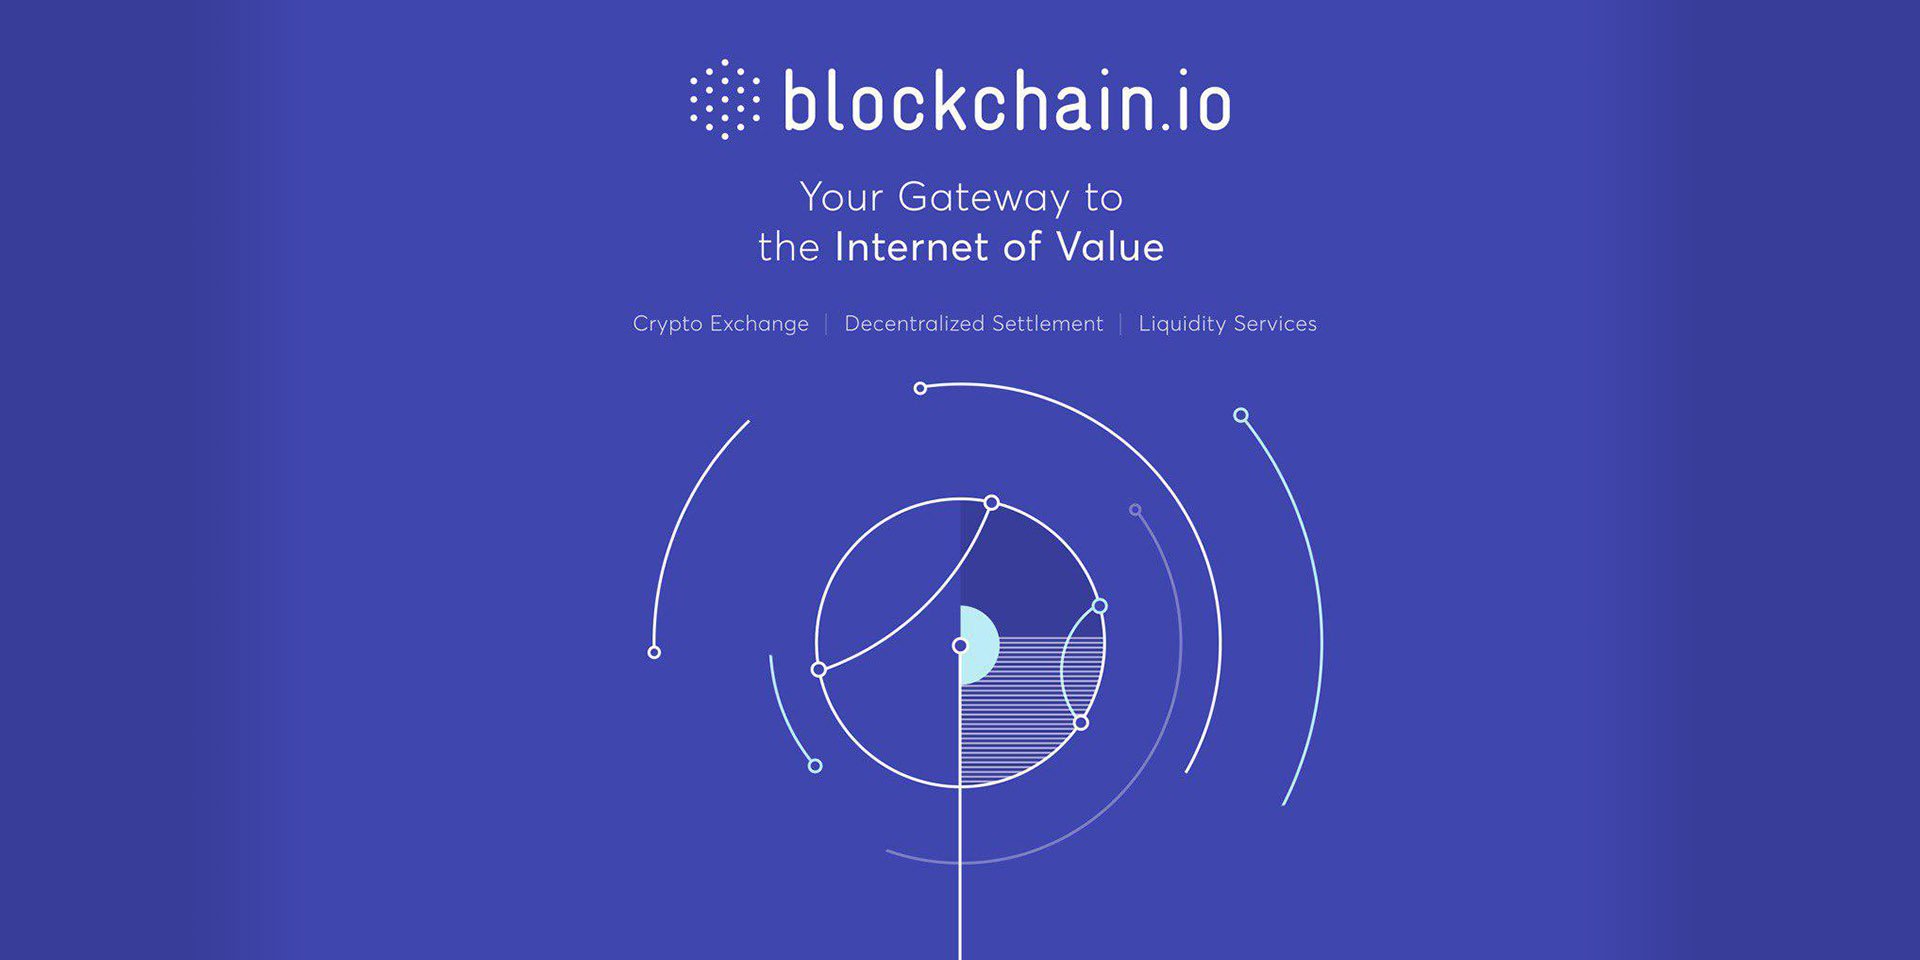 Introducing Your Gateway to the Internet of Value: How Blockchain.io Takes on Investors’ Worst Crypto Dilemma